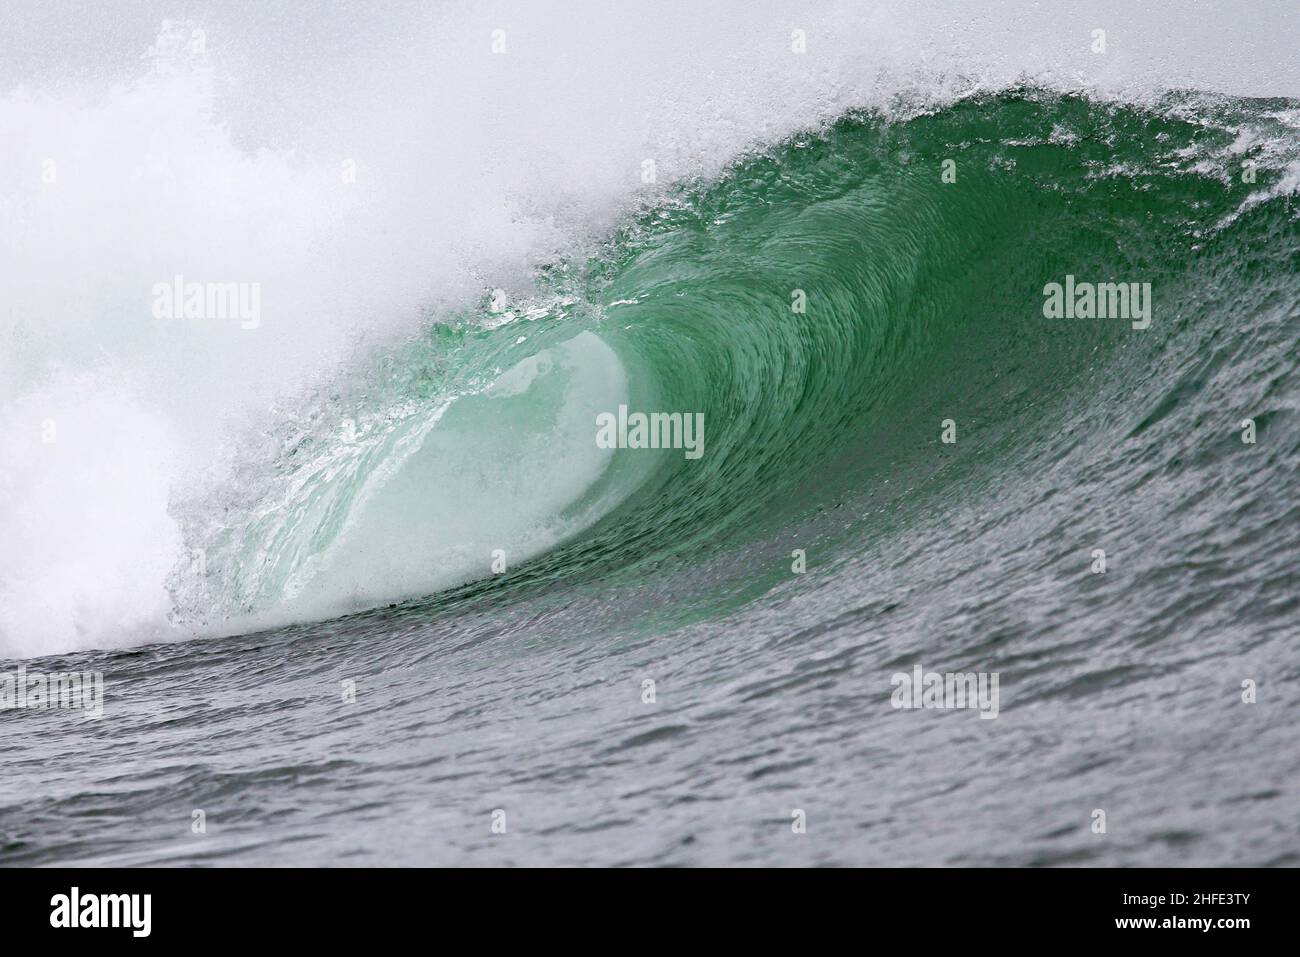 A large hollow curling tube wave at Airport Reef in Tuban, Bali in Indonesia. Stock Photo